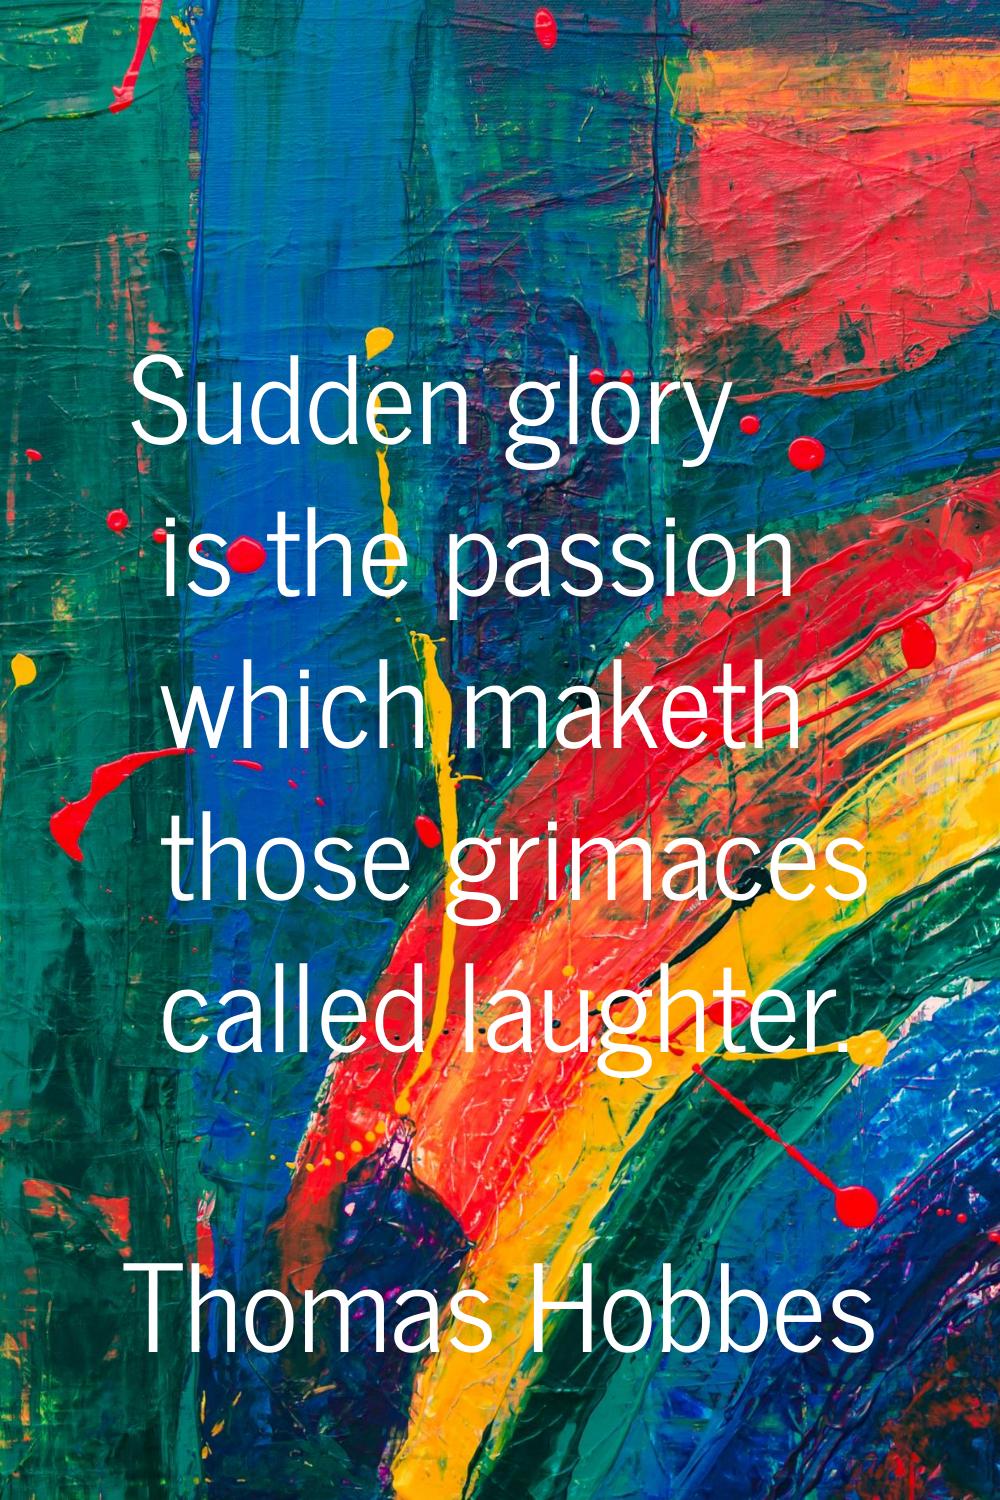 Sudden glory is the passion which maketh those grimaces called laughter.